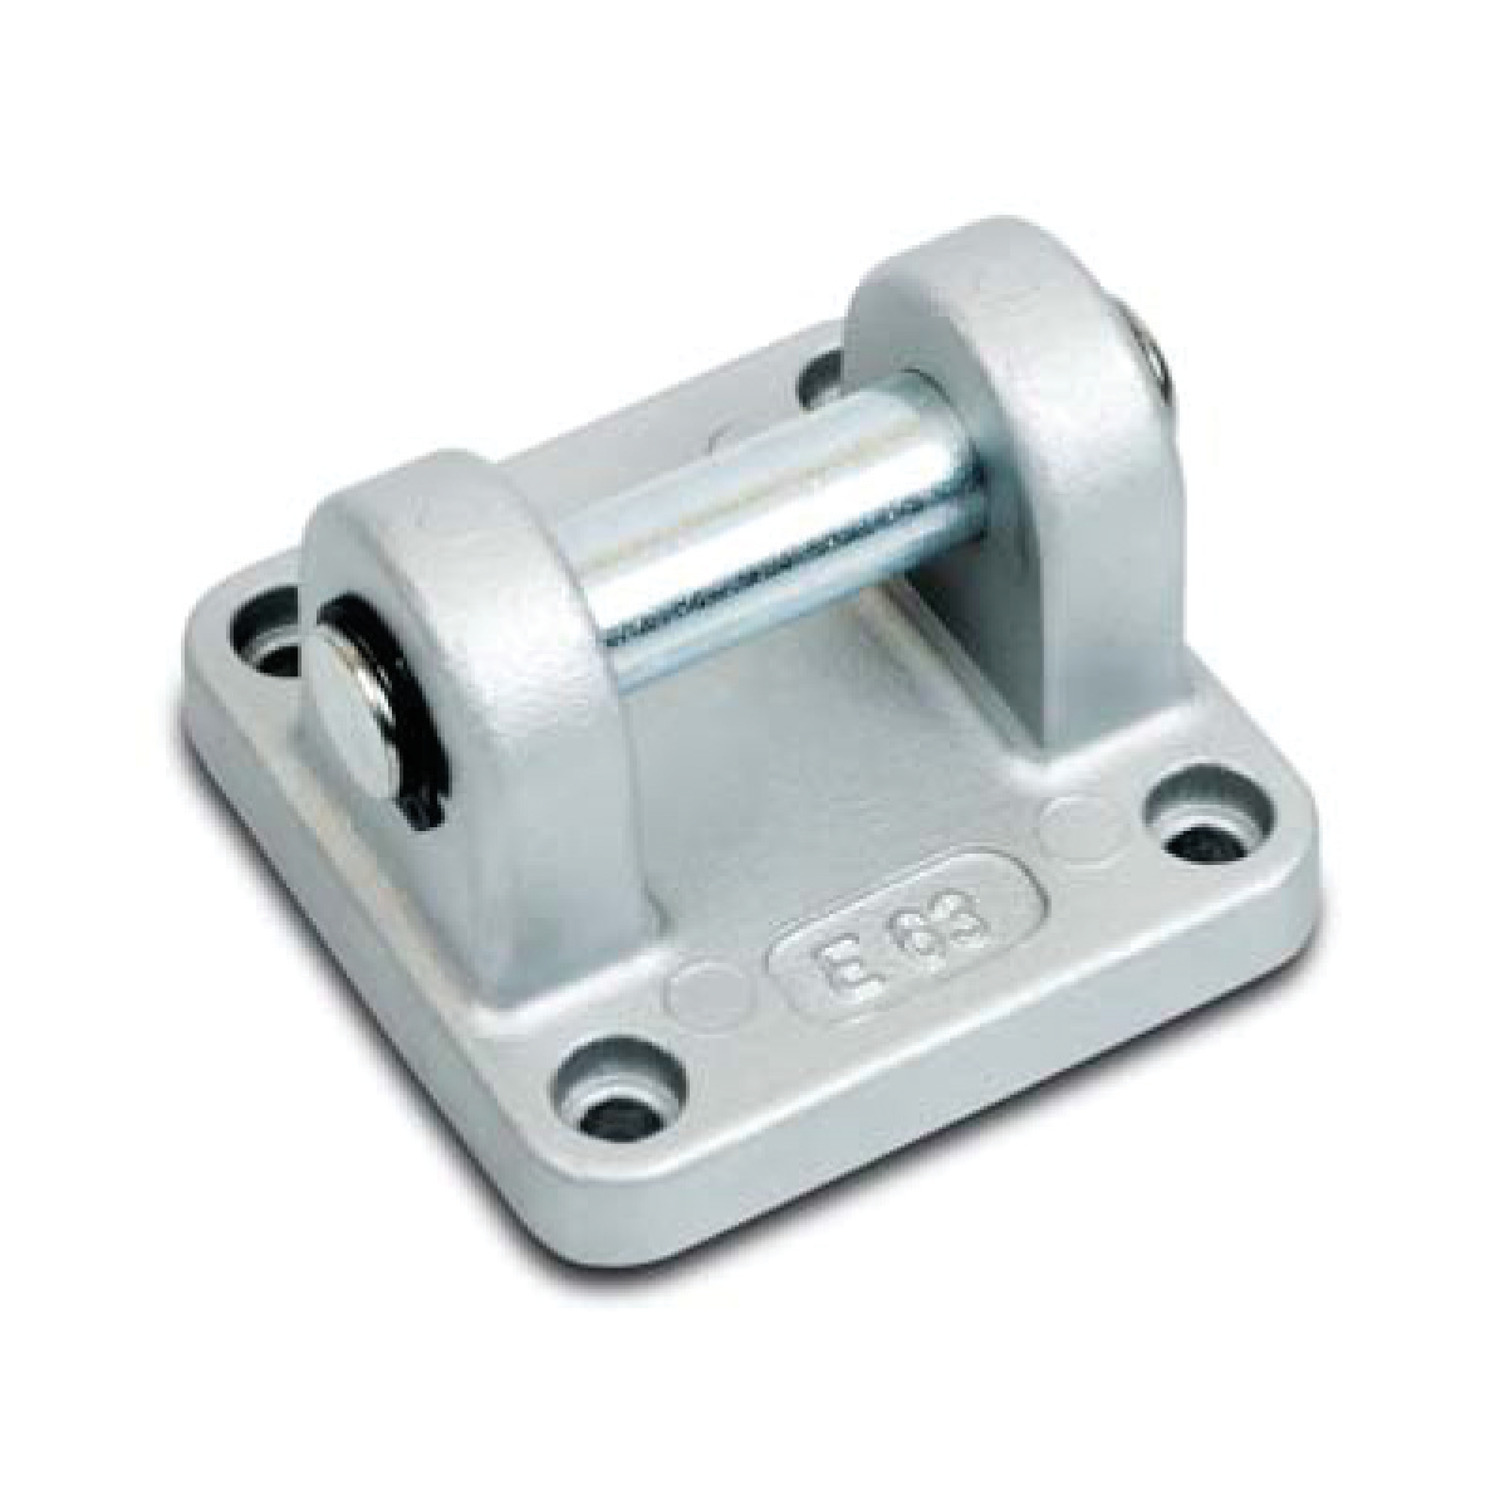 L4810 - Air Cylinder Mounts - CETOP Series